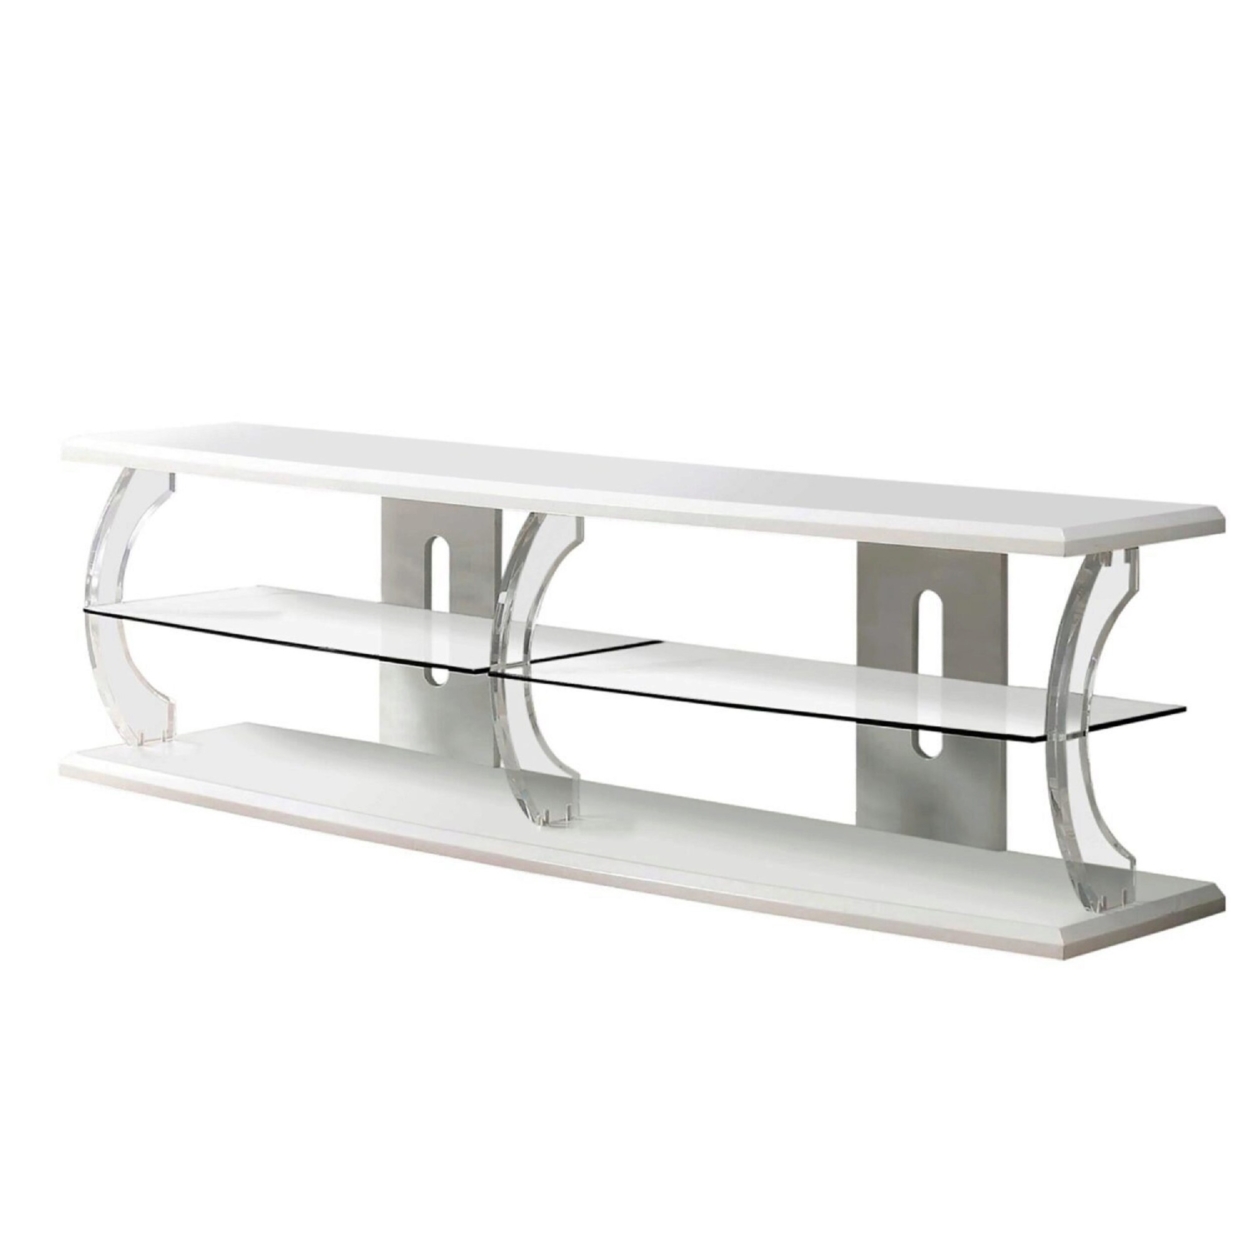 60 Wooden TV Stand With Spacious Glass Shelf, White And Clear- Saltoro Sherpi